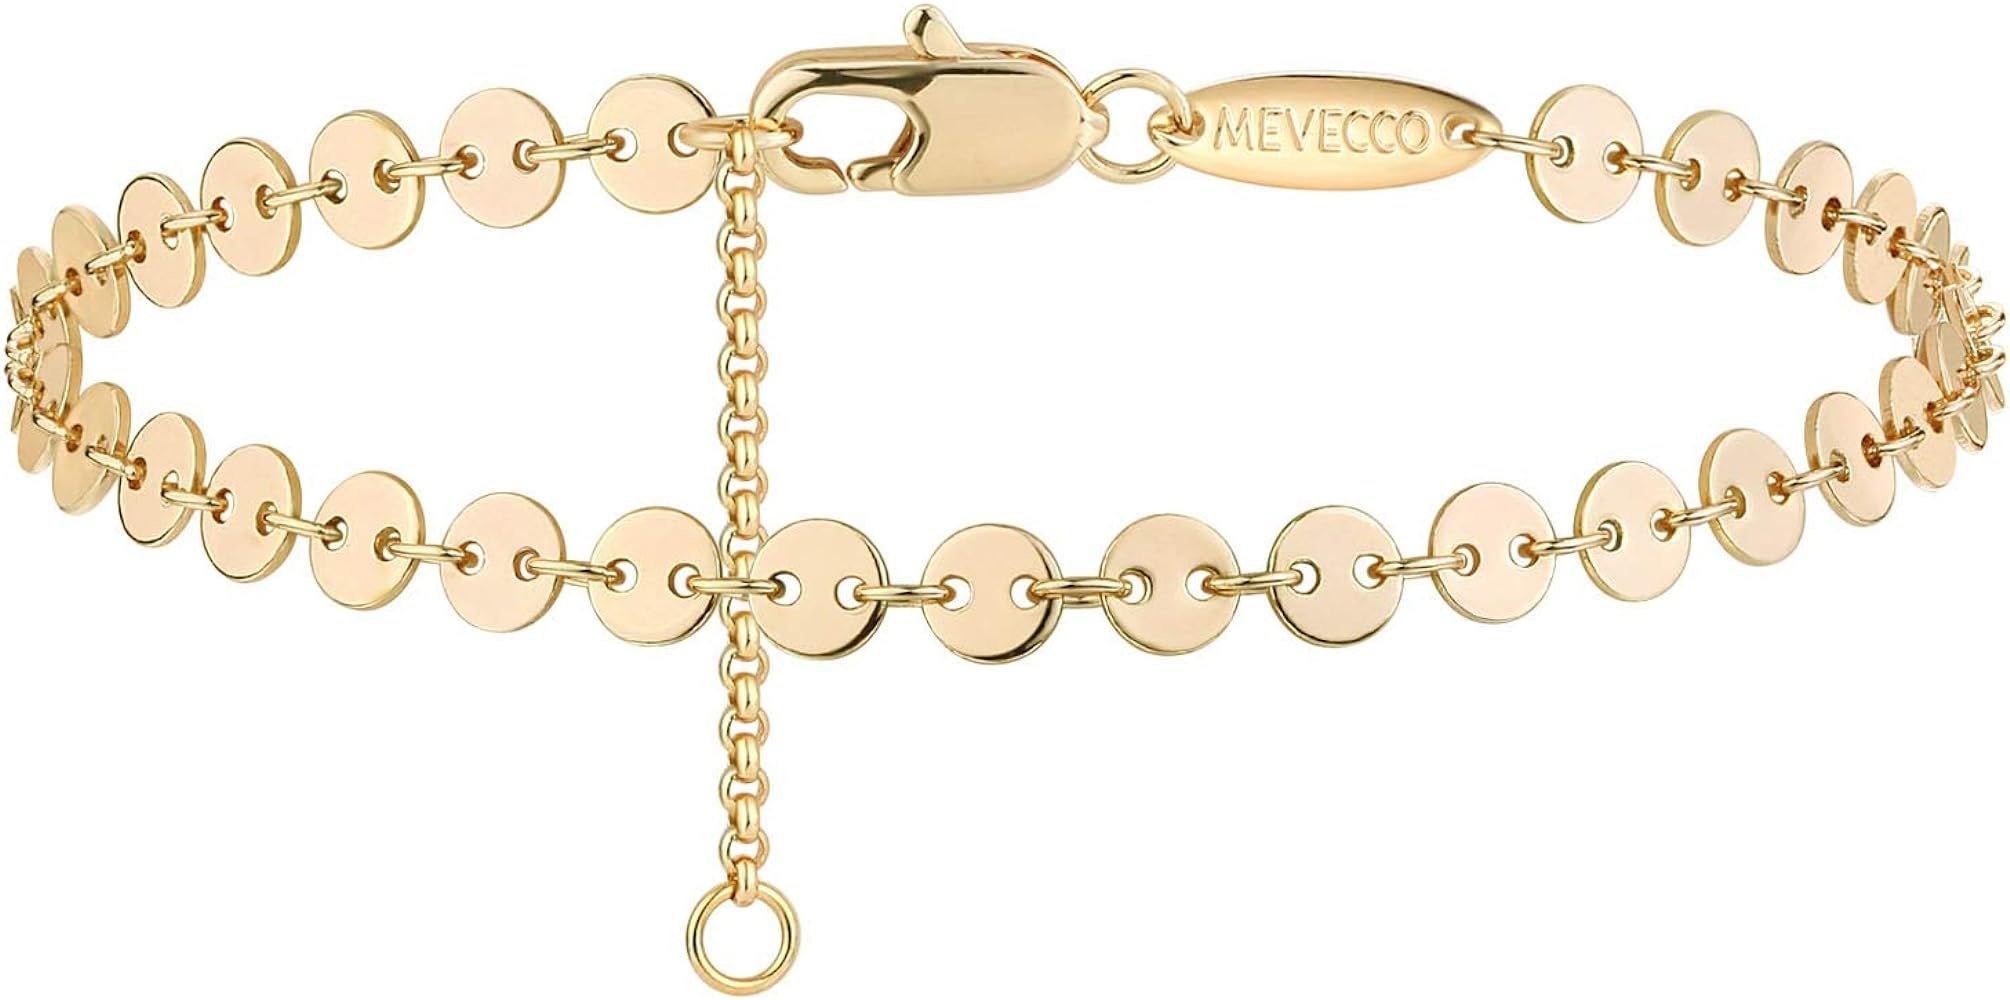 MEVECCO Bracelet for Women 14K Gold Plated Dainty Chain Simple Jewelry Cute for Girls | Amazon (US)